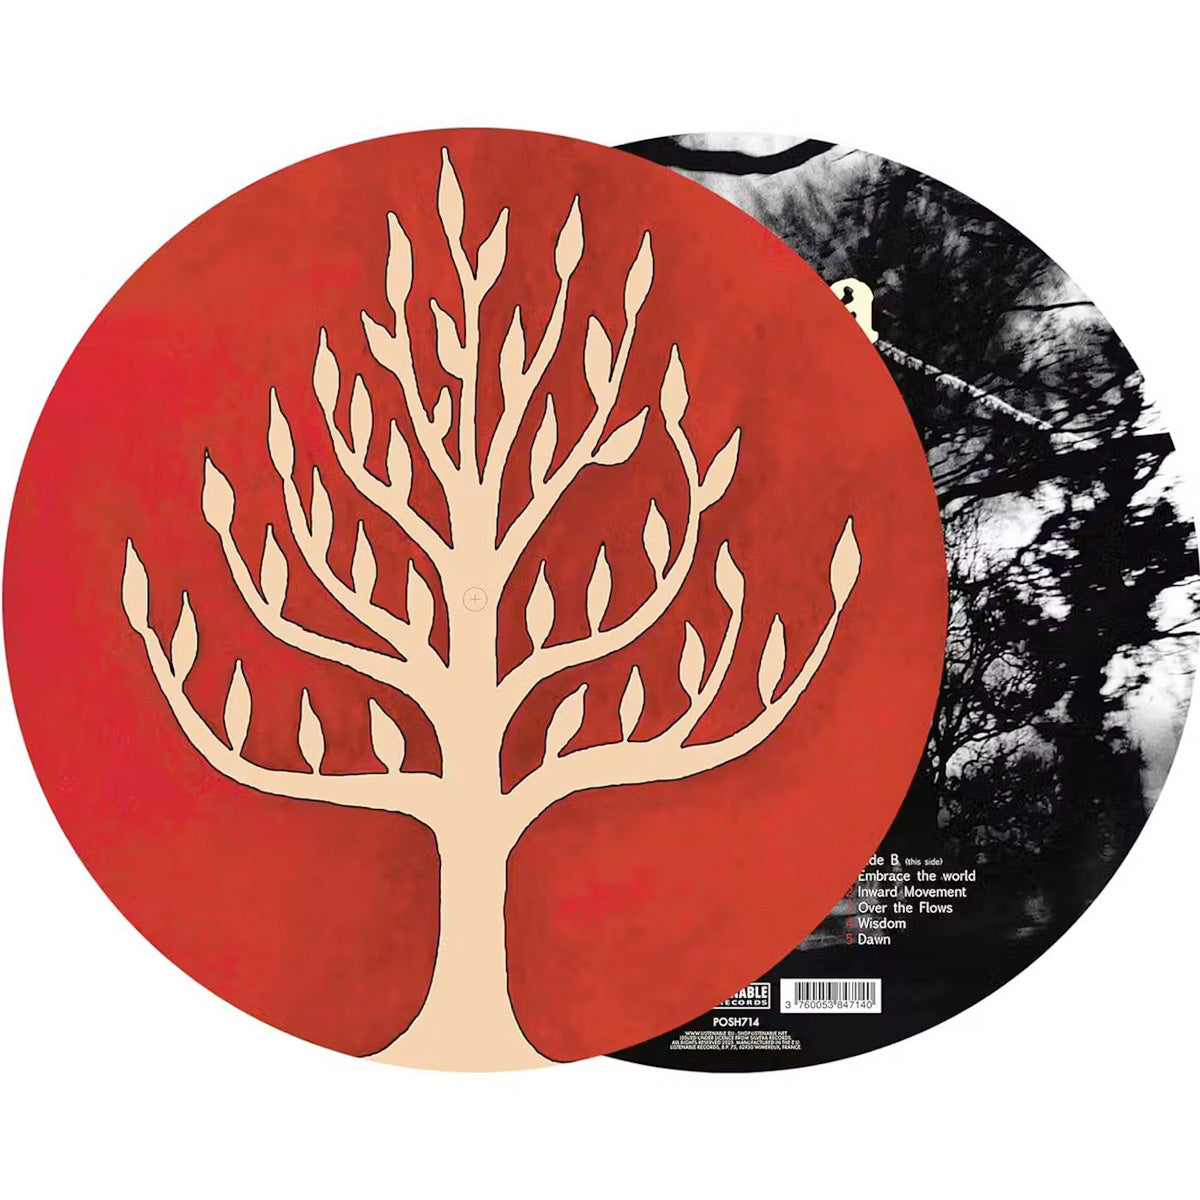 Gojira — The Link (Picture Disc)